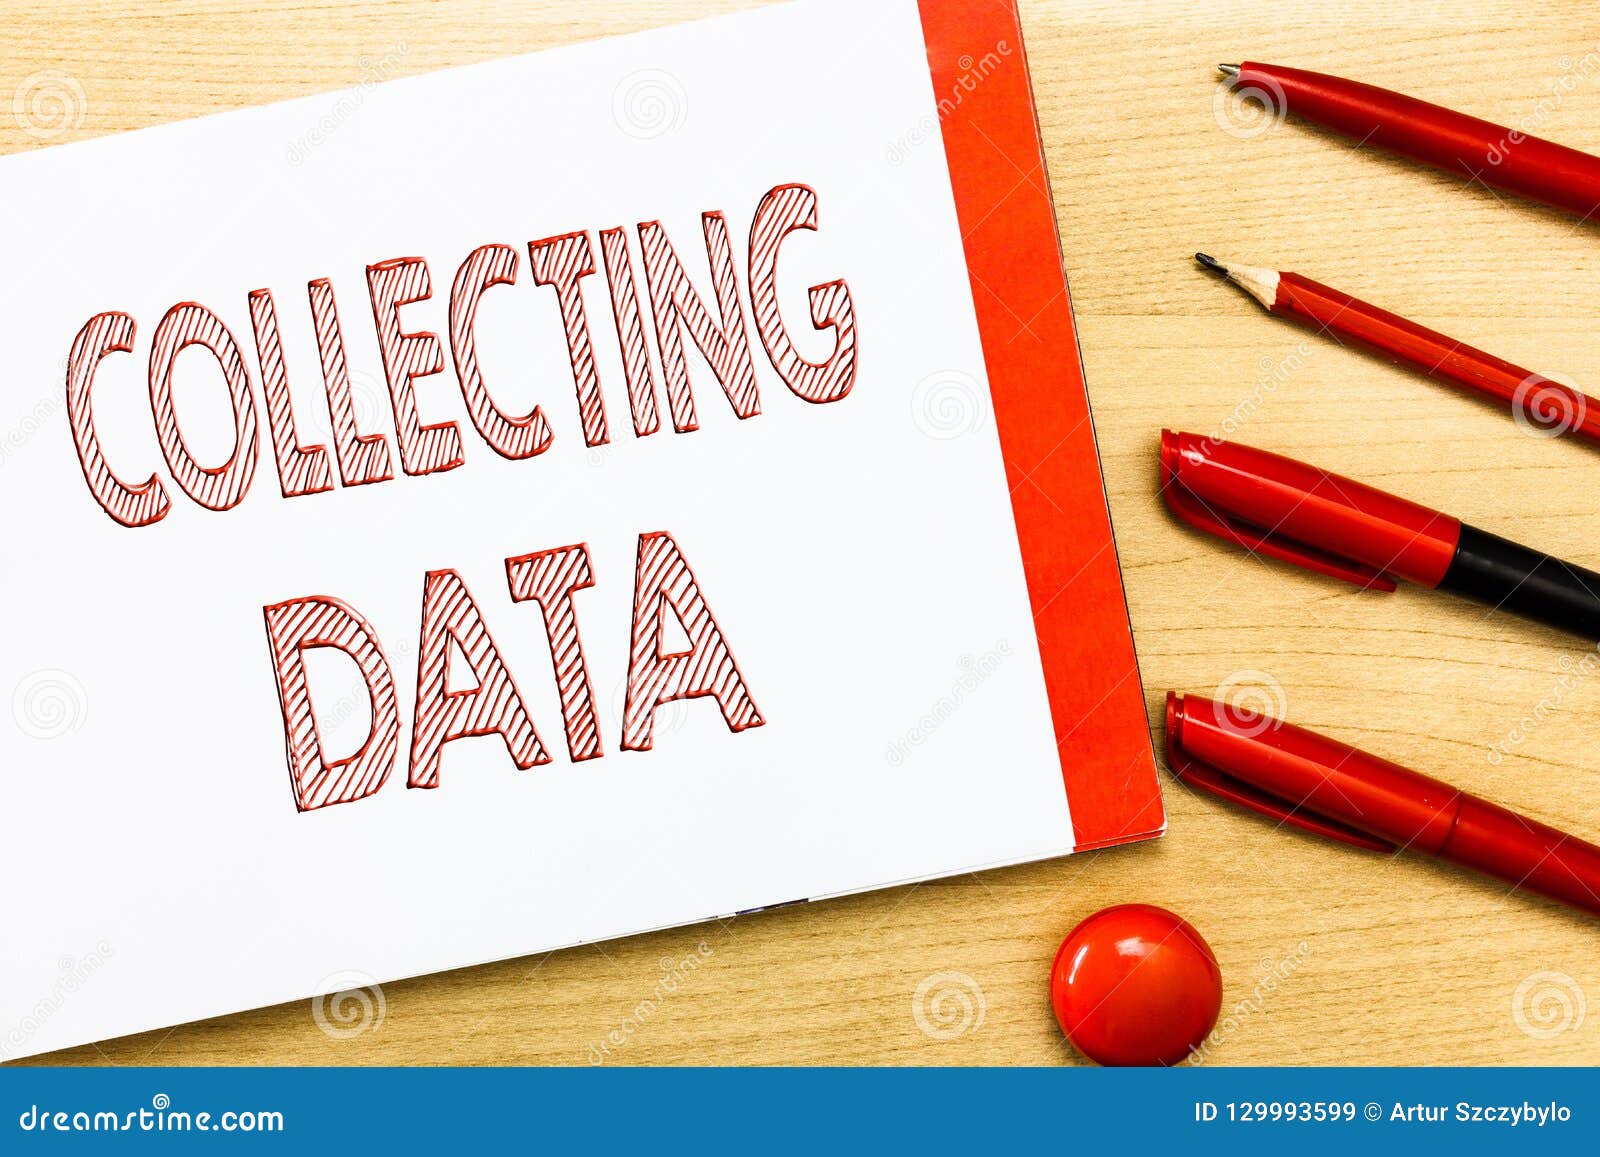 Writing collection. Handwriting data collection.